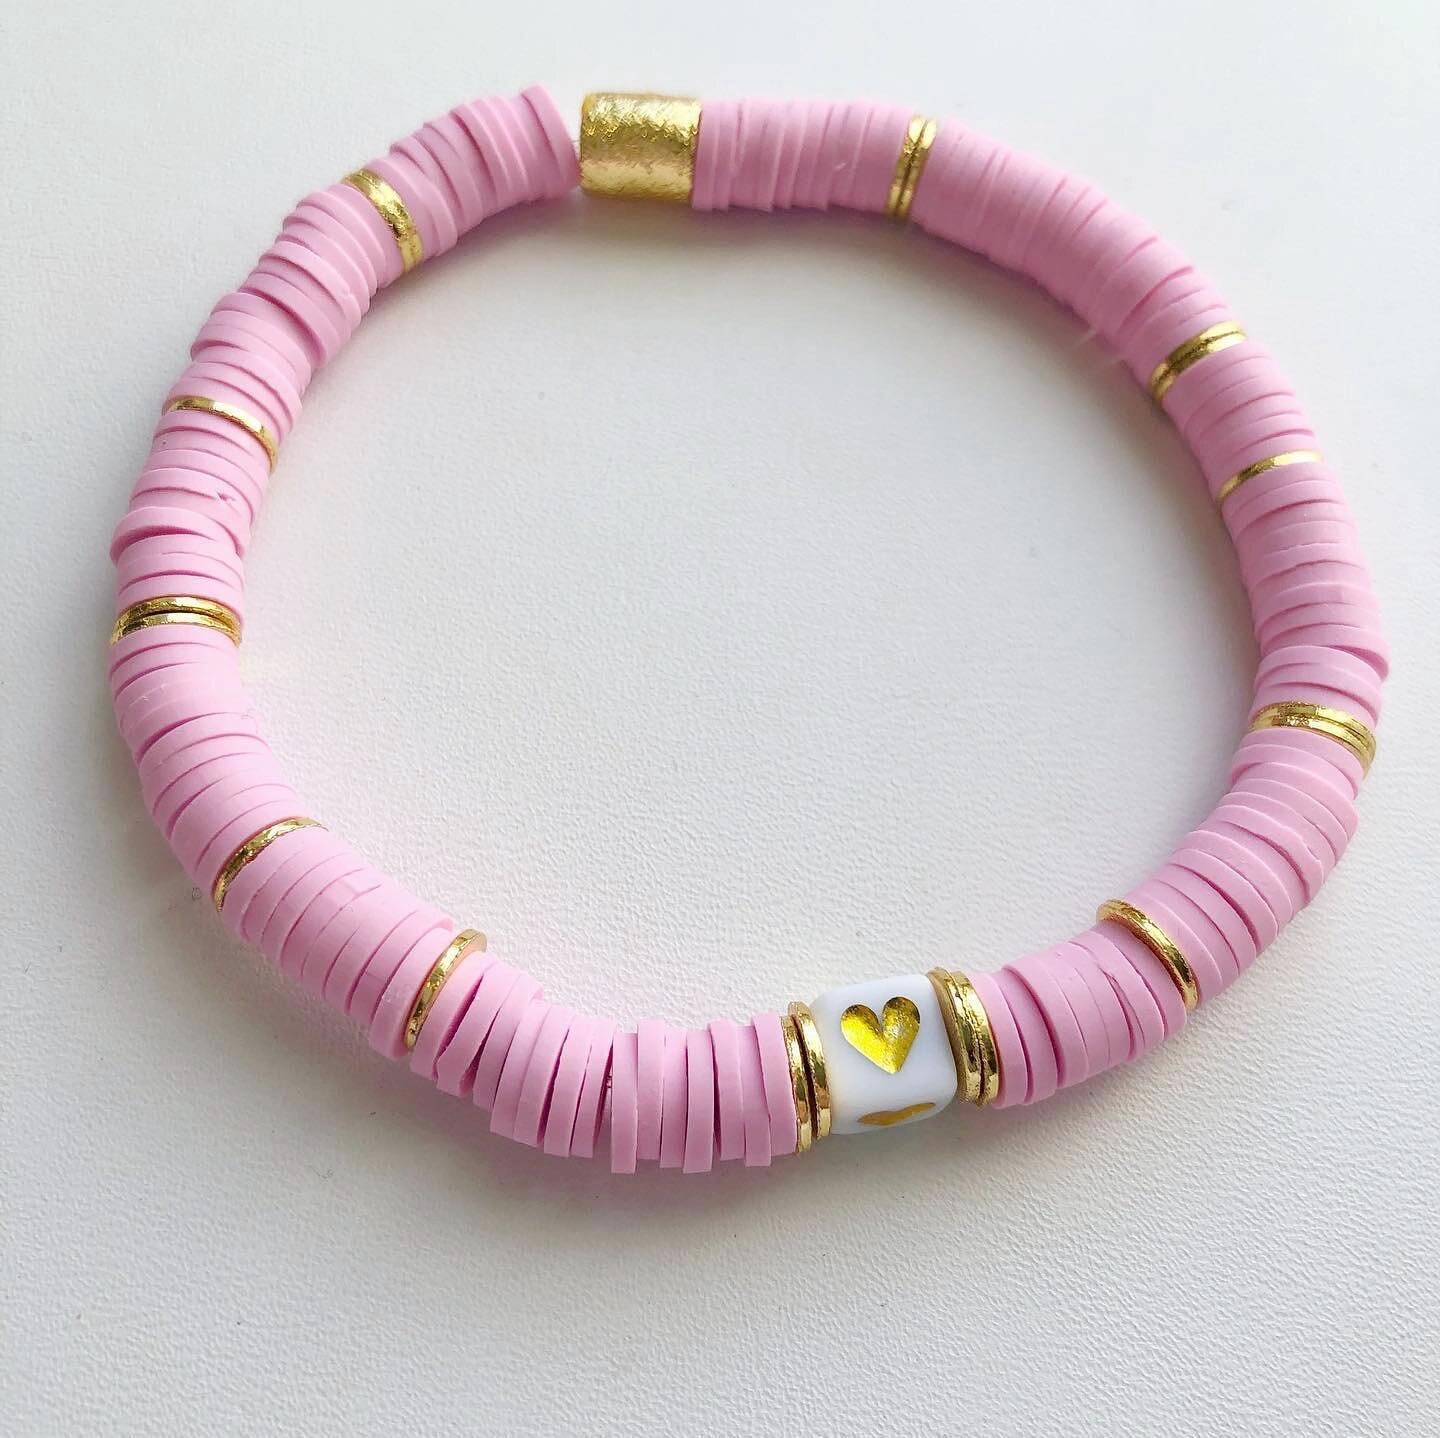 There&rsquo;s still time to win this bracelet and more goodies from local makers! 🎉 Giveaway closes at midnight tonight. Check out the last post for how to enter. Good luck!!